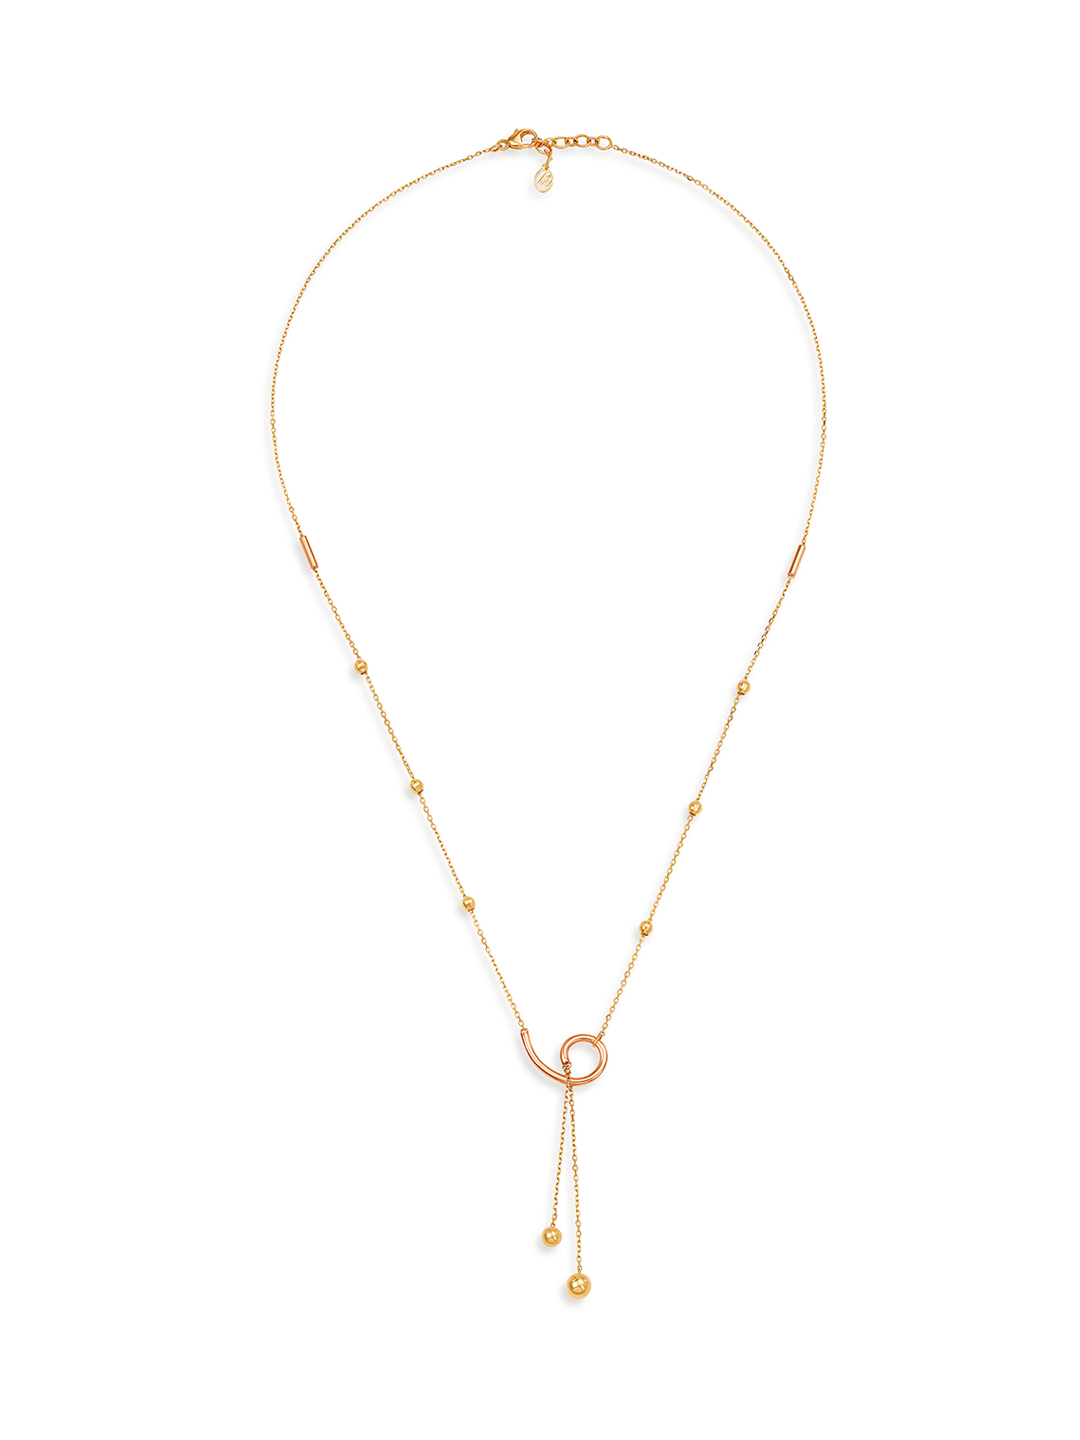 Mia by Tanishq 14KT Yellow Gold Pendant with Chain Price in India